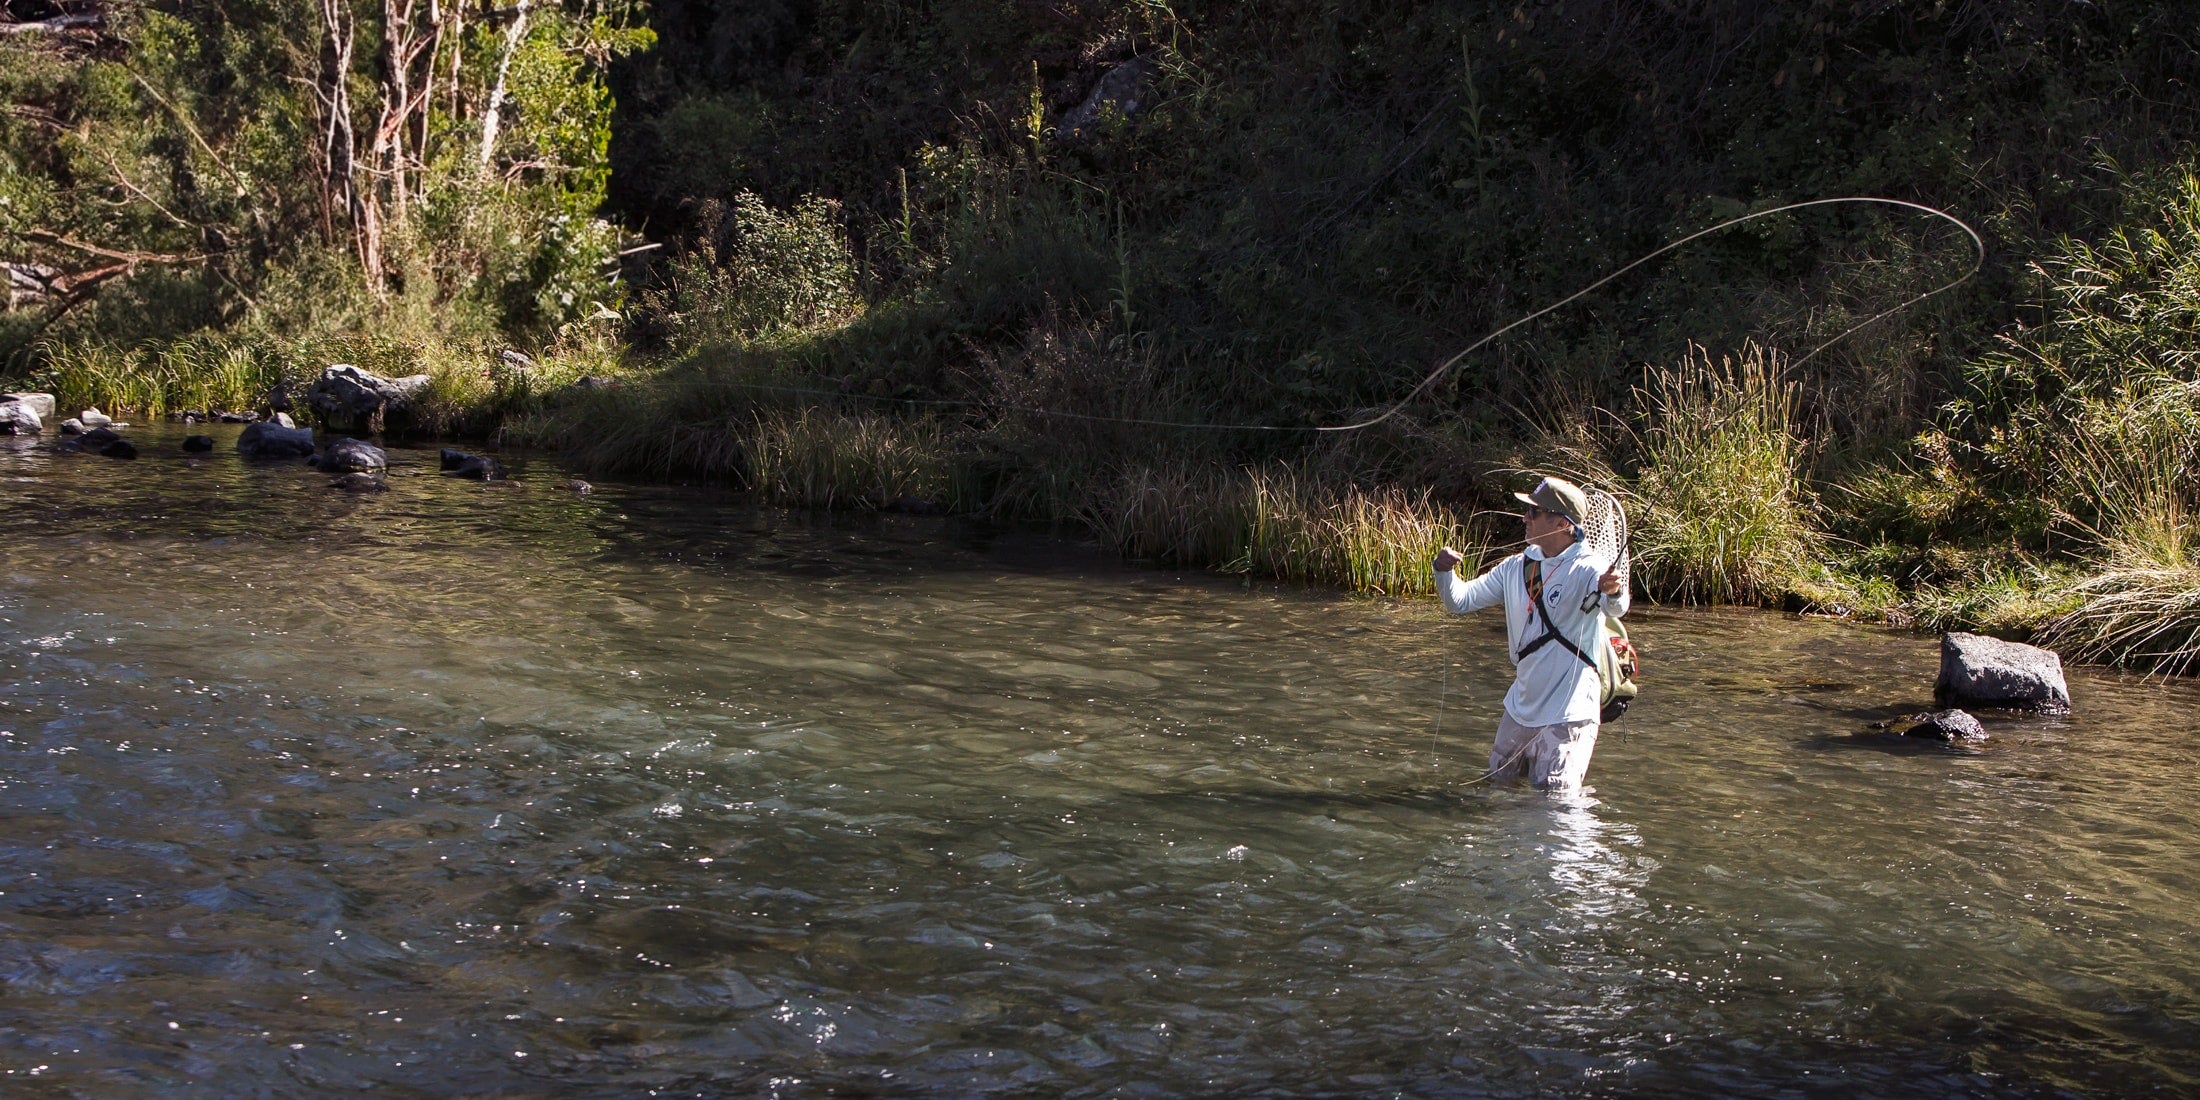 JH Fly Co: Fly Fishing Begins Here